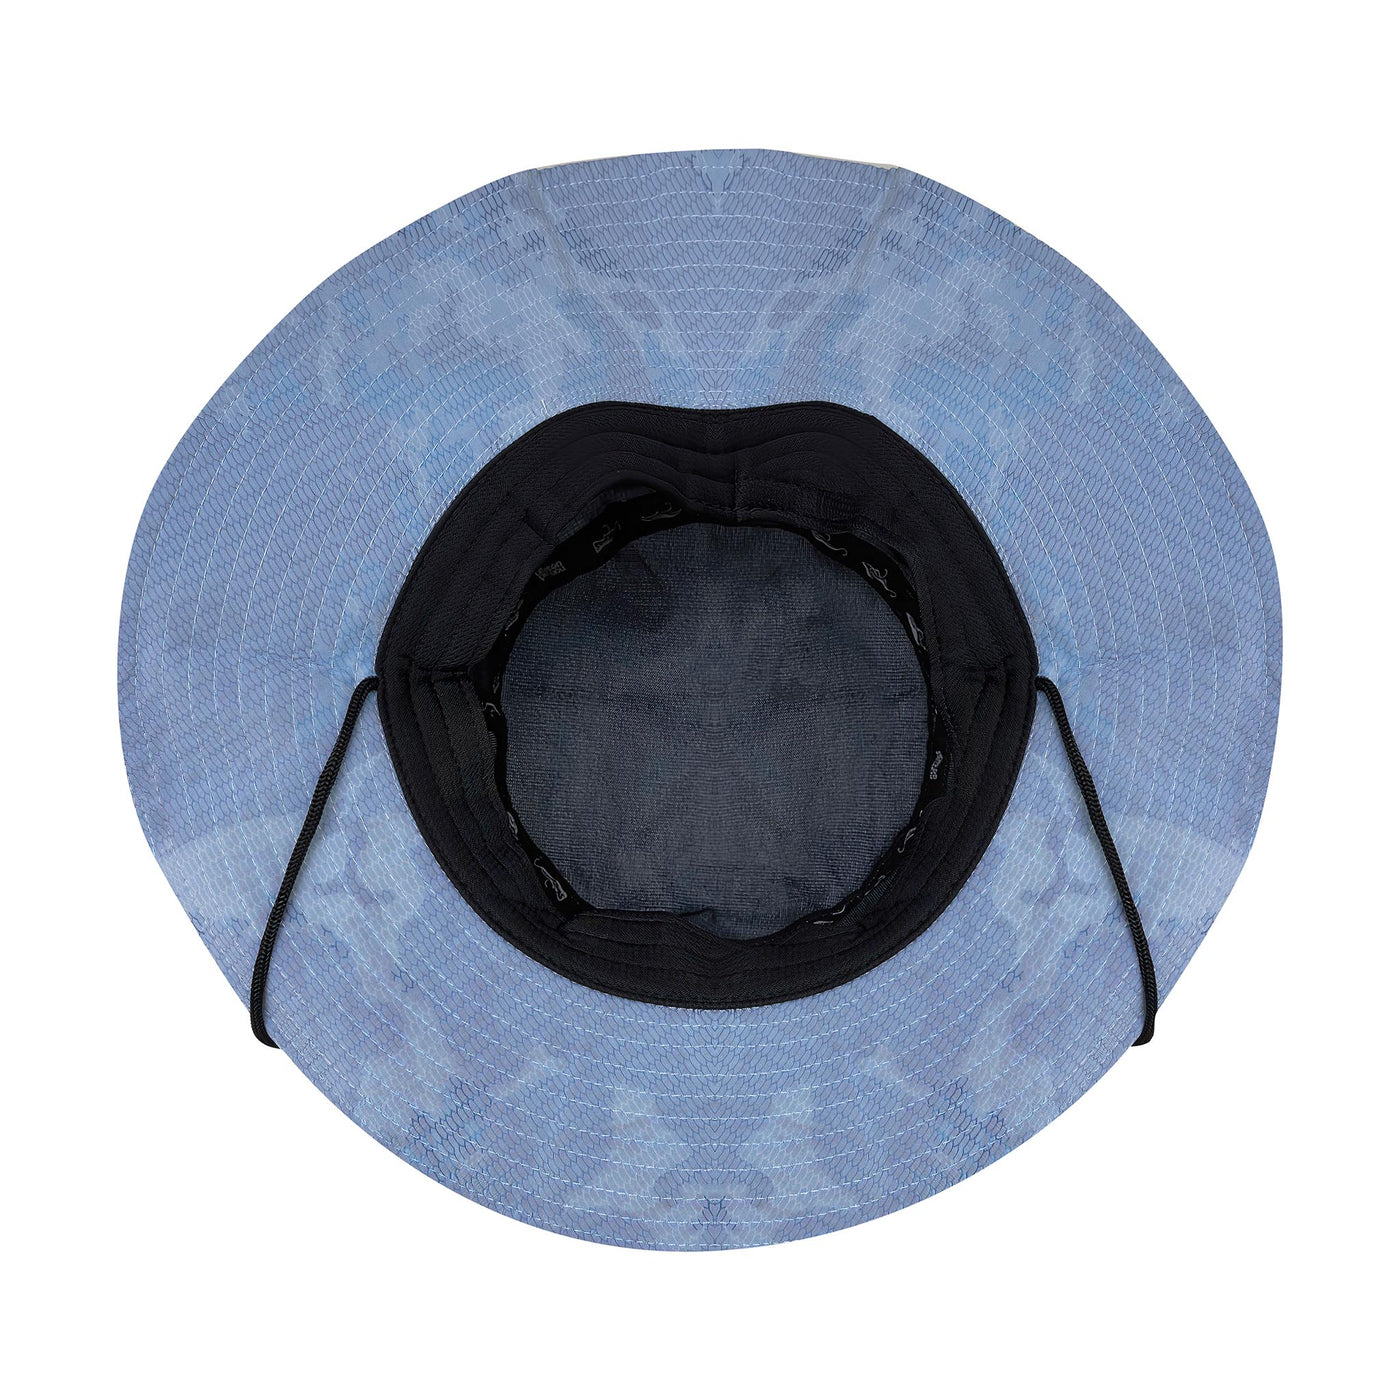 Booney Hat - Blue Camo – Nomad Tackle